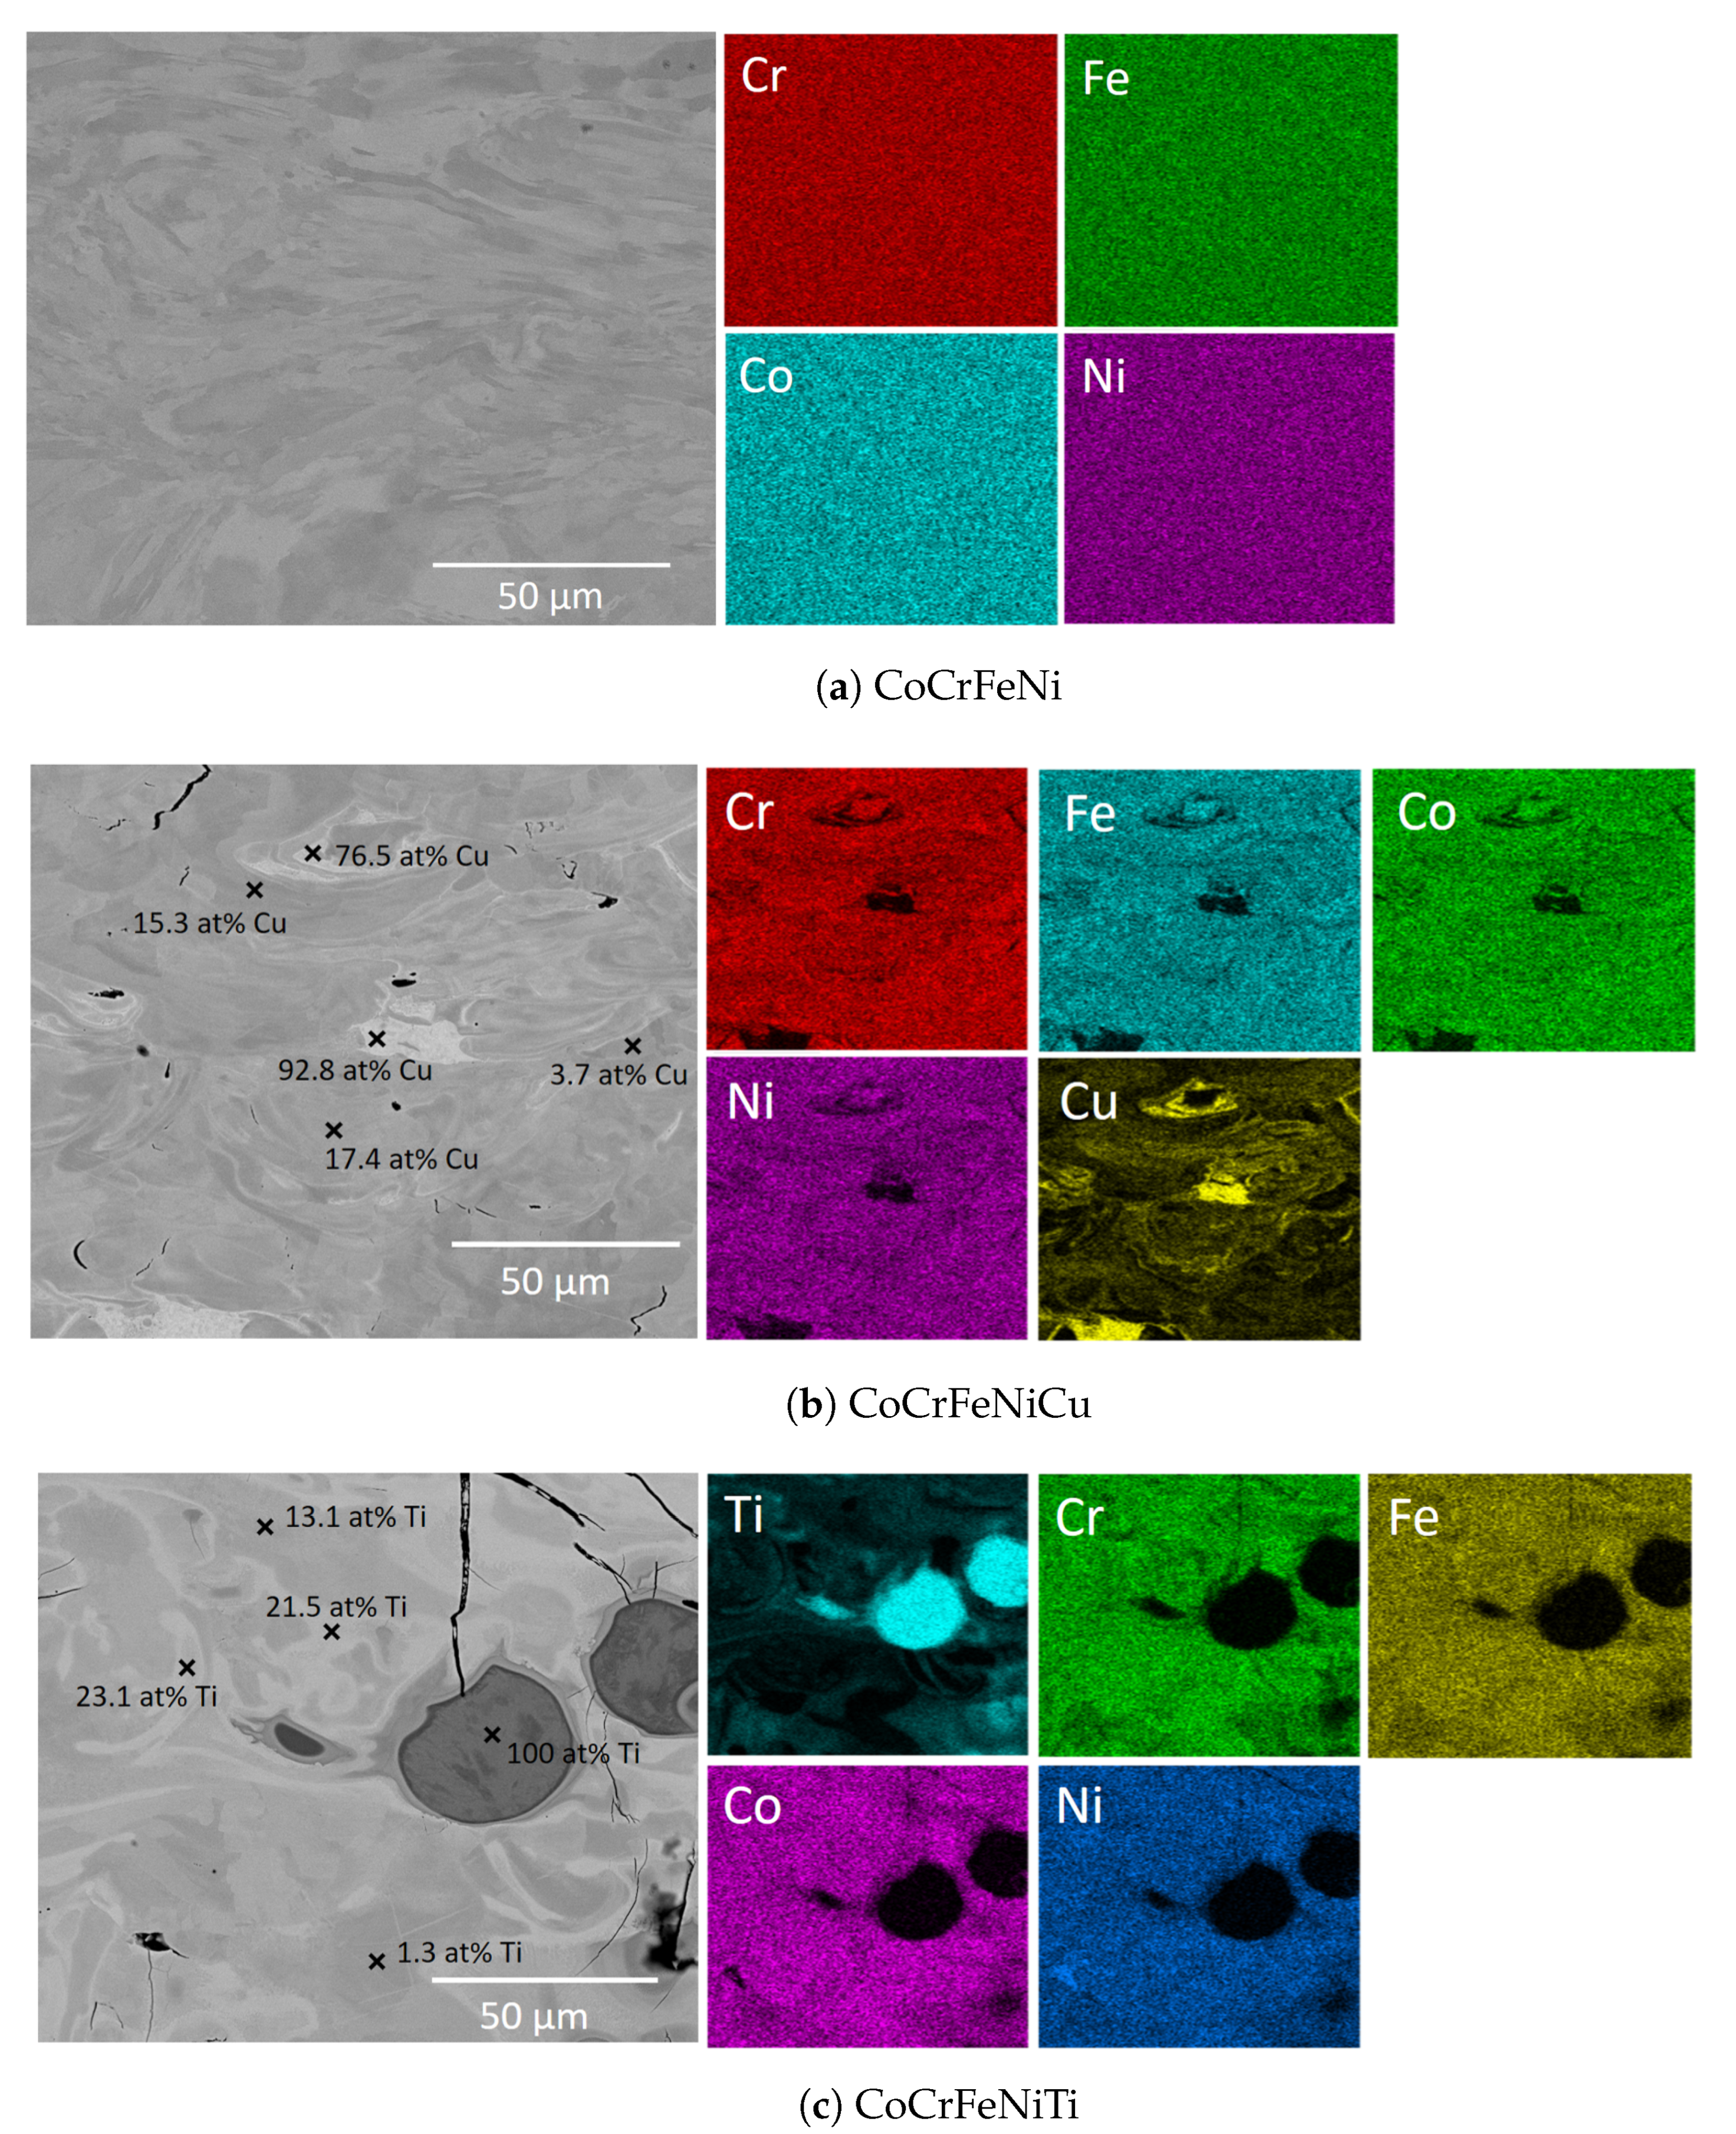 Back Scattered Electron (BSE) images and accompanying EDS scans. Farquhar et al. (2022). In-Situ Alloying of CoCrFeNiX High Entropy Alloys by Selective Laser Melting. - Back Scattered Electron (BSE) images and accompanying EDS scans of the (a) CoCrFeNi, (b) CoCrFeNiCu and (c) CoCrFeNiTi alloys. EDS point scans showing the variation in concentration of Cu and Ti have also been shown, where all other elements remained equiatomic.